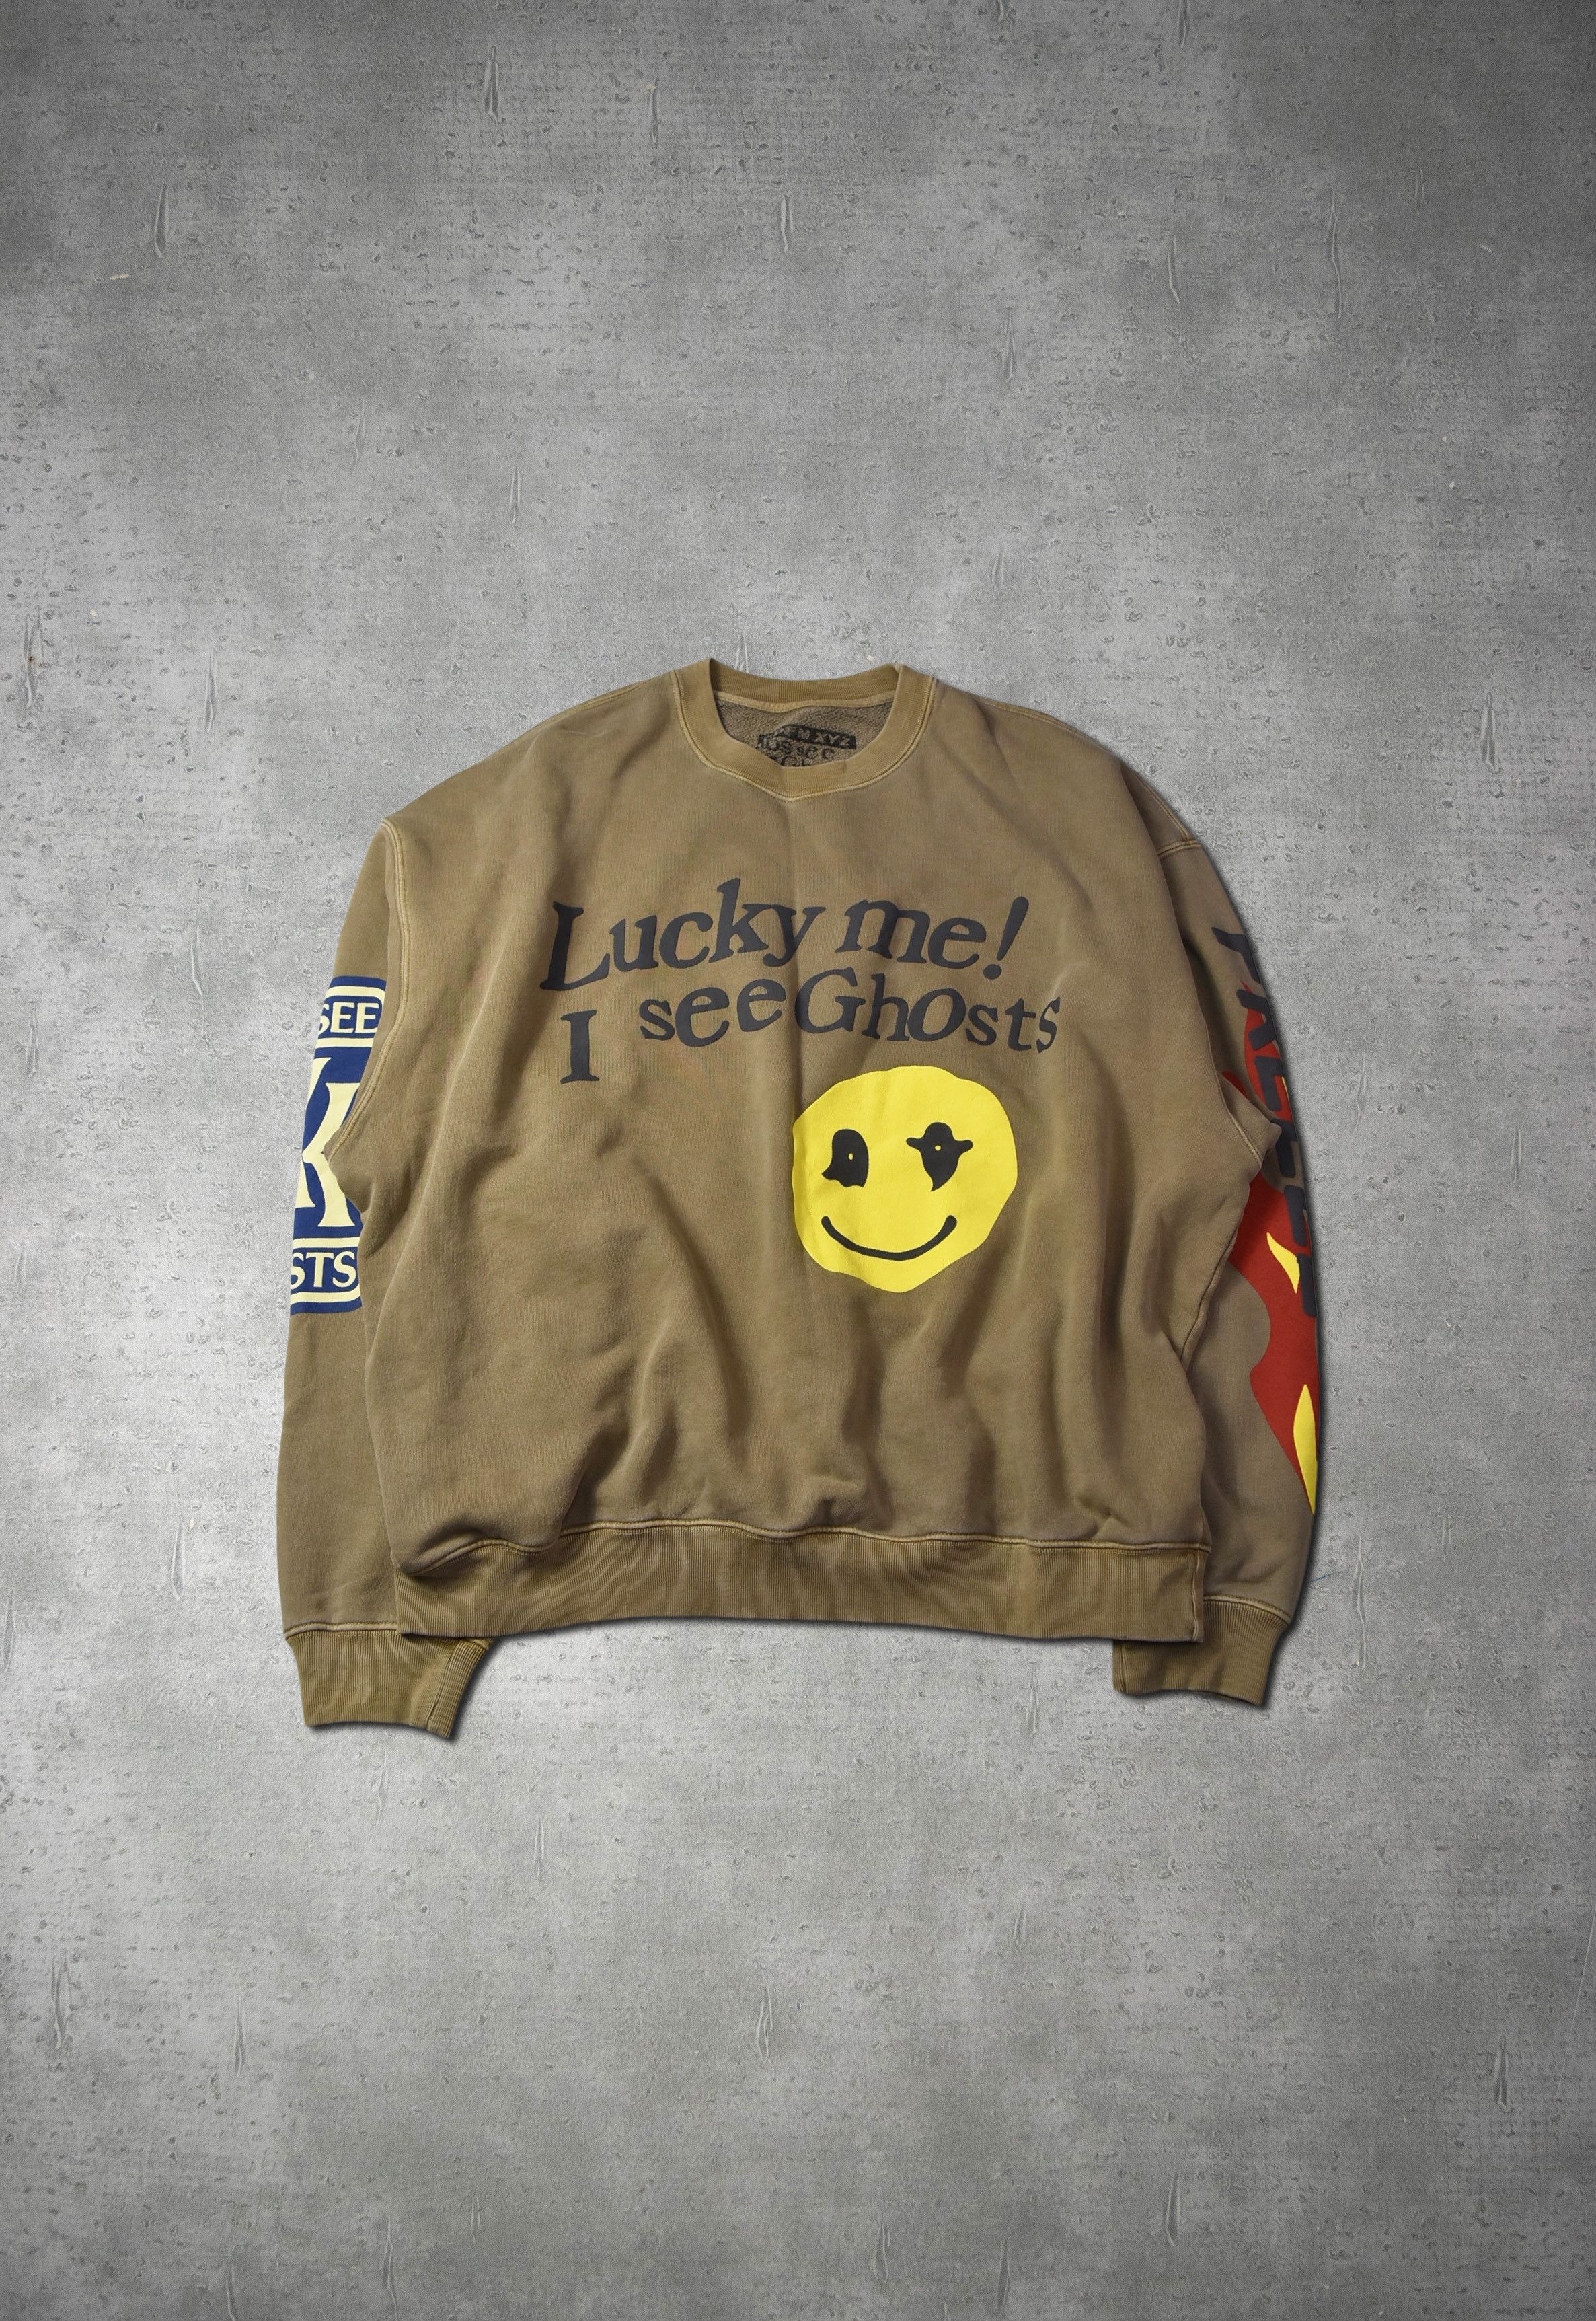 Kids See Ghosts CPFM x kids see ghosts graphic sweat shirt 14-1-1 531 |  Grailed